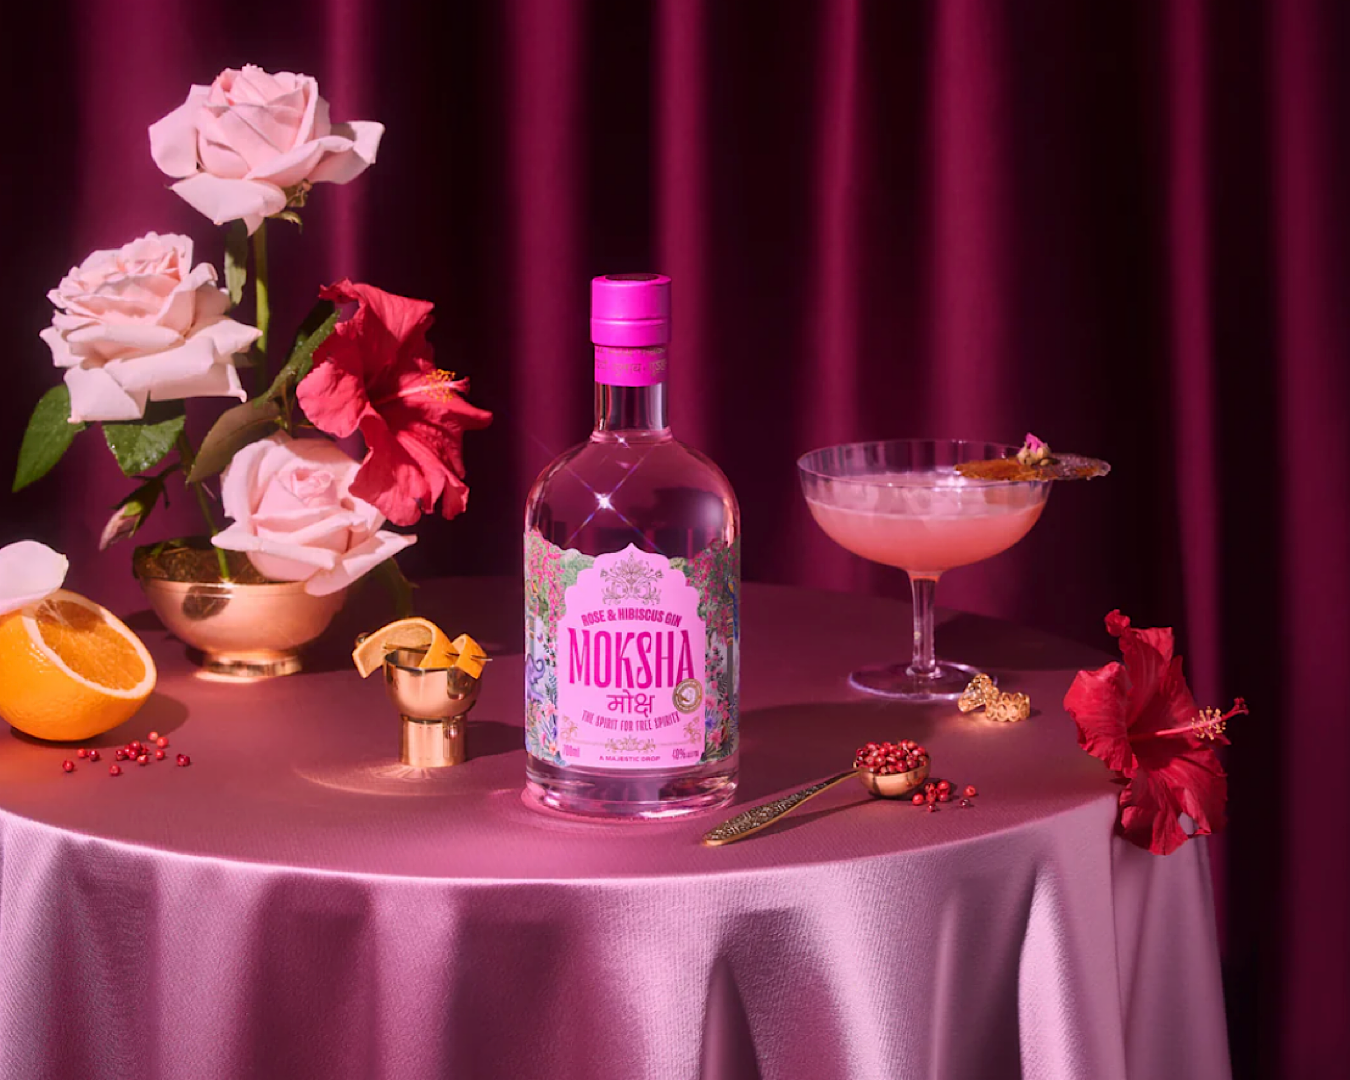 A pink bottle of gin stands temptingly amidst a seductive pink set up. 